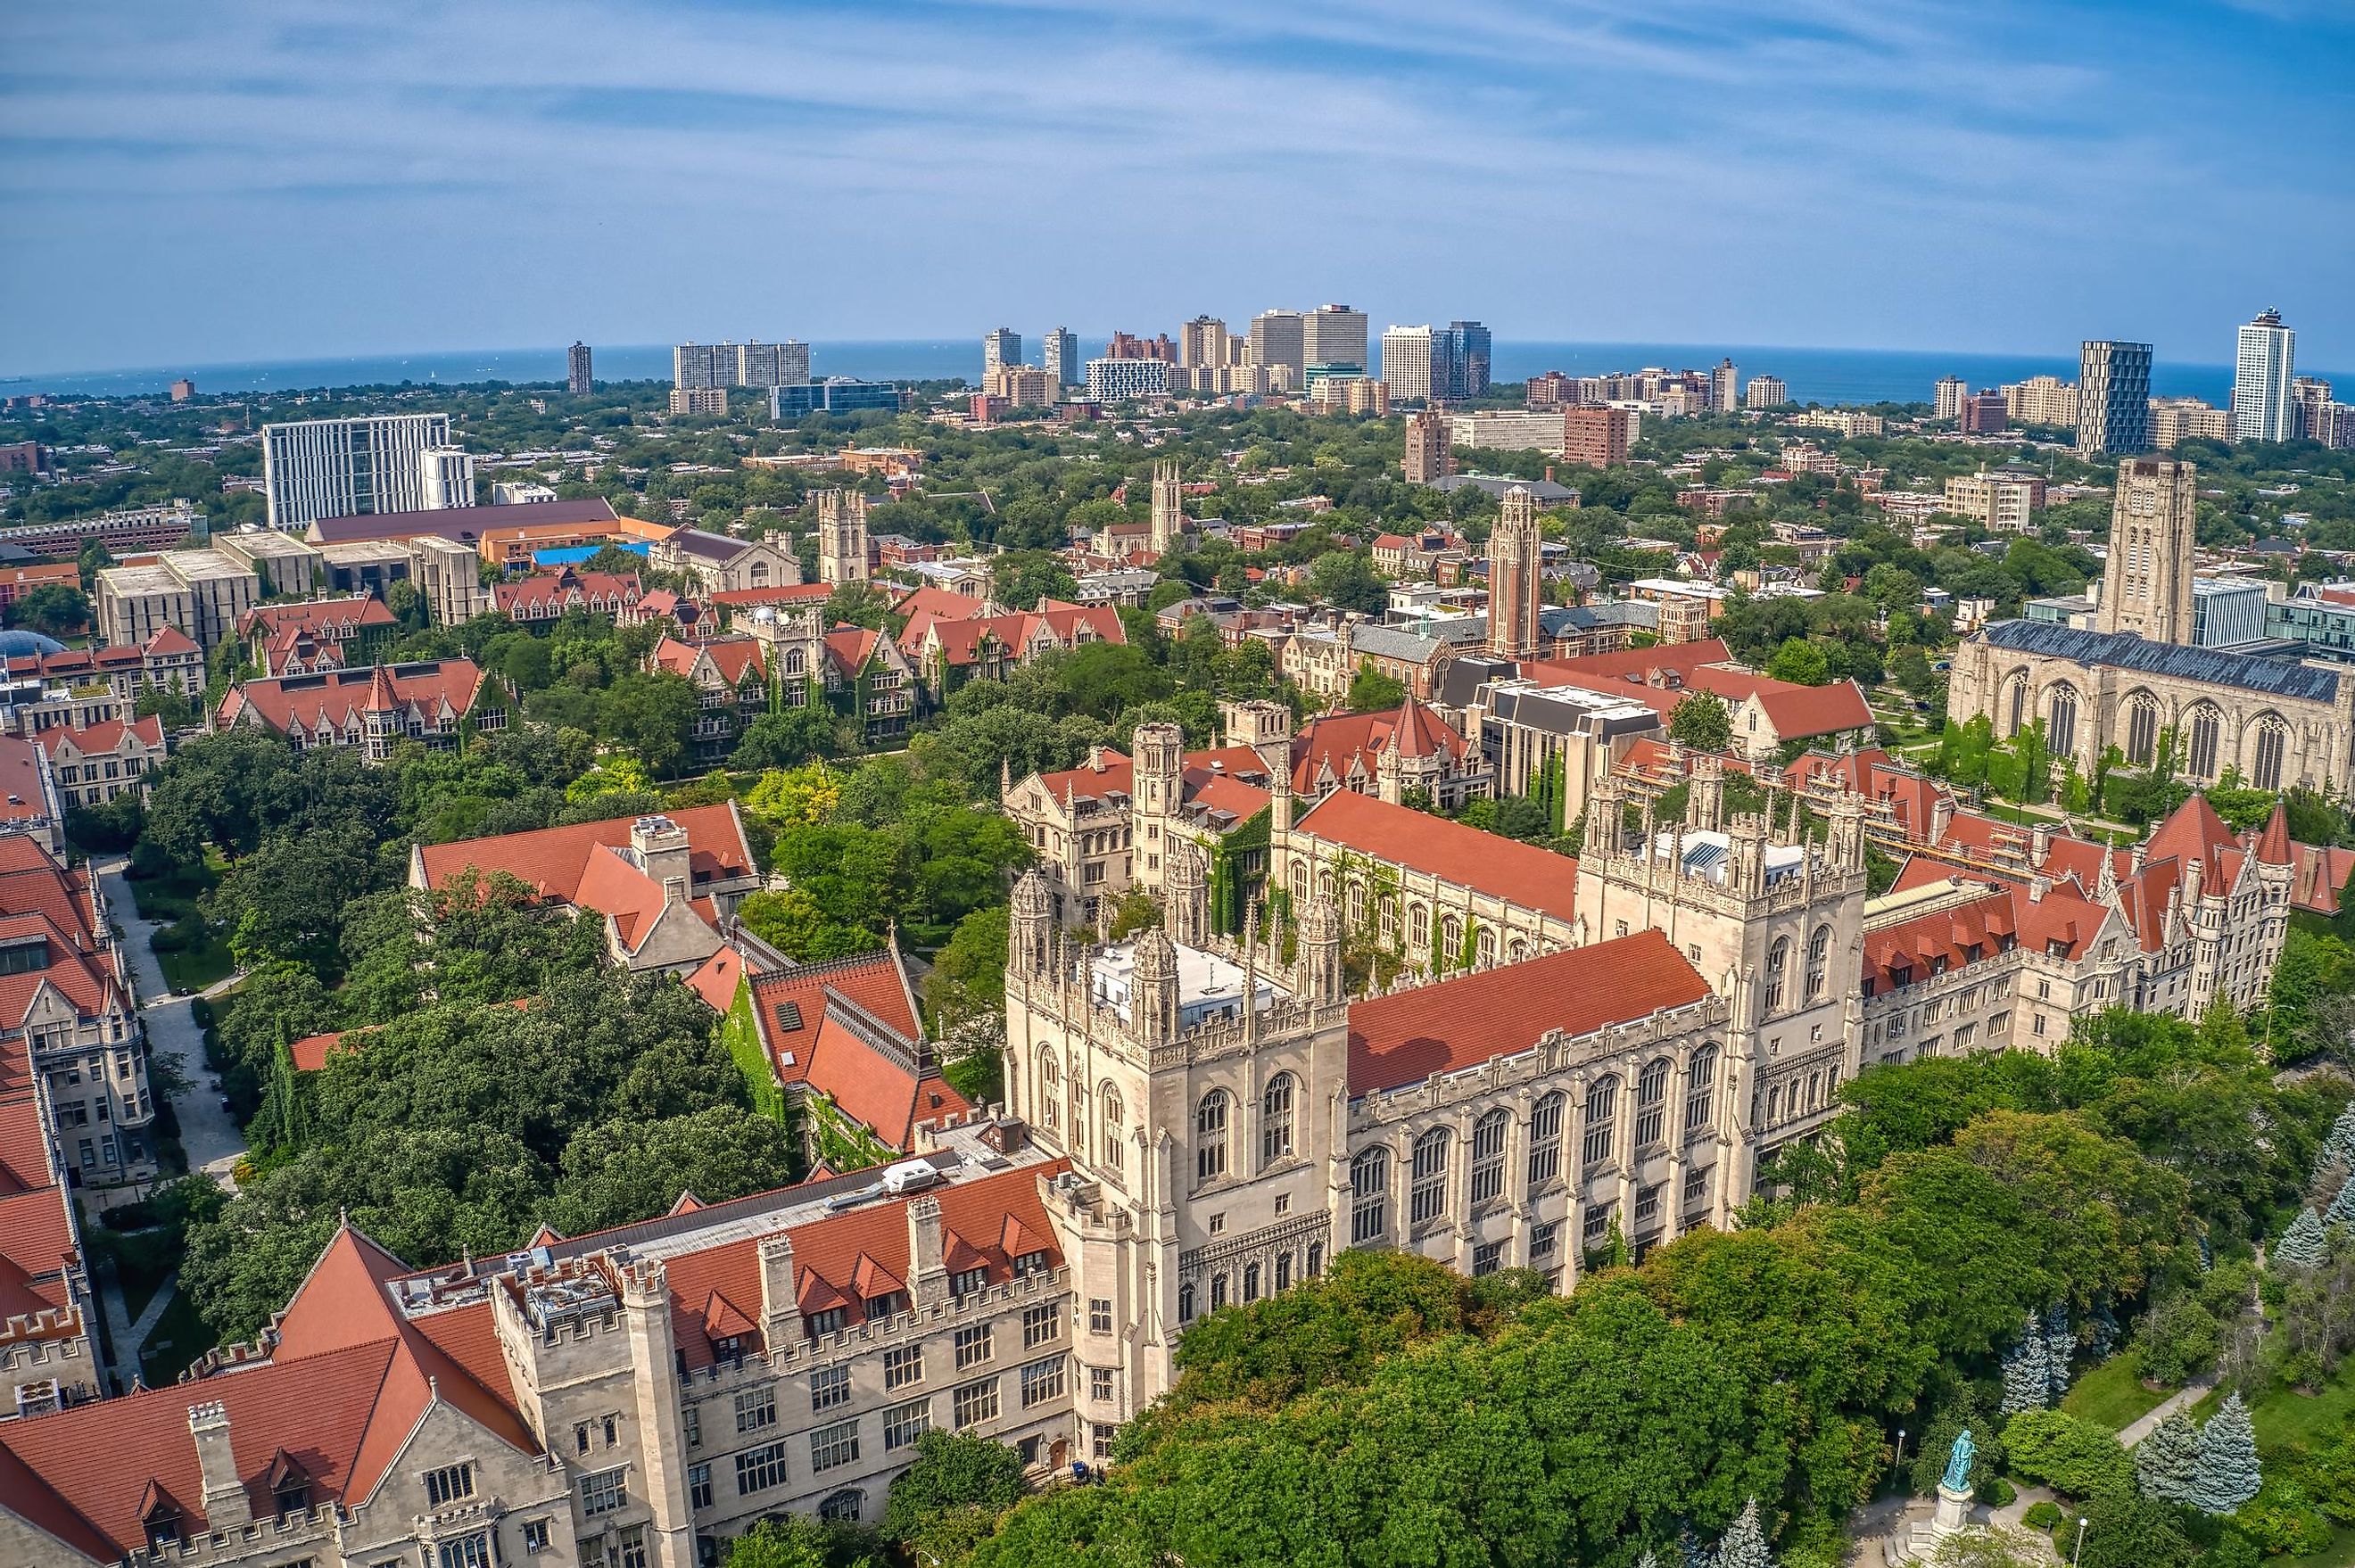 Aerial view of a university campus in Chicago, Illinois.